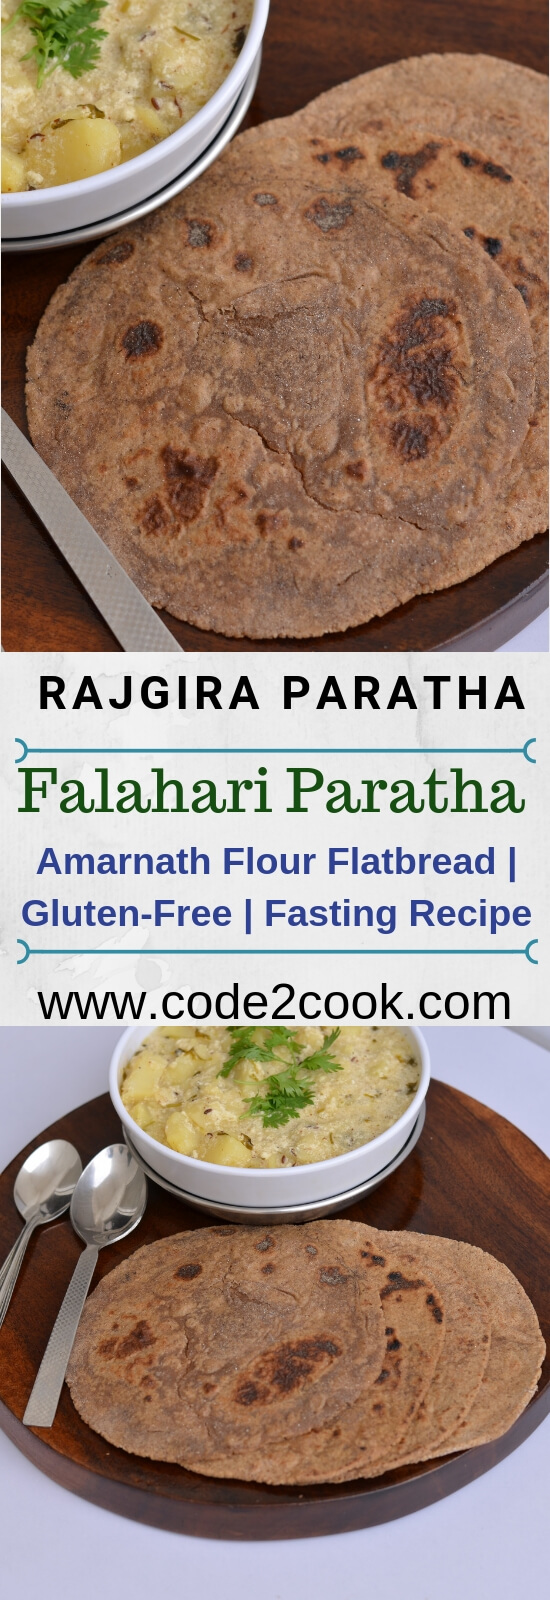 Amarnath flour paratha or Rajgira paratha is commonly used during Navratri fasting days in most Indian Kitchen. This is a gluten-free and vegan flatbread. Adding boiled mashed potato while making a dough with the flour, helps to make paratha or flatbread. This is very quick and easiest paratha recipe to make on fasting days or upvas. Such paratha recipe is also known as farali paratha or falahari paratha (phalahari paratha).